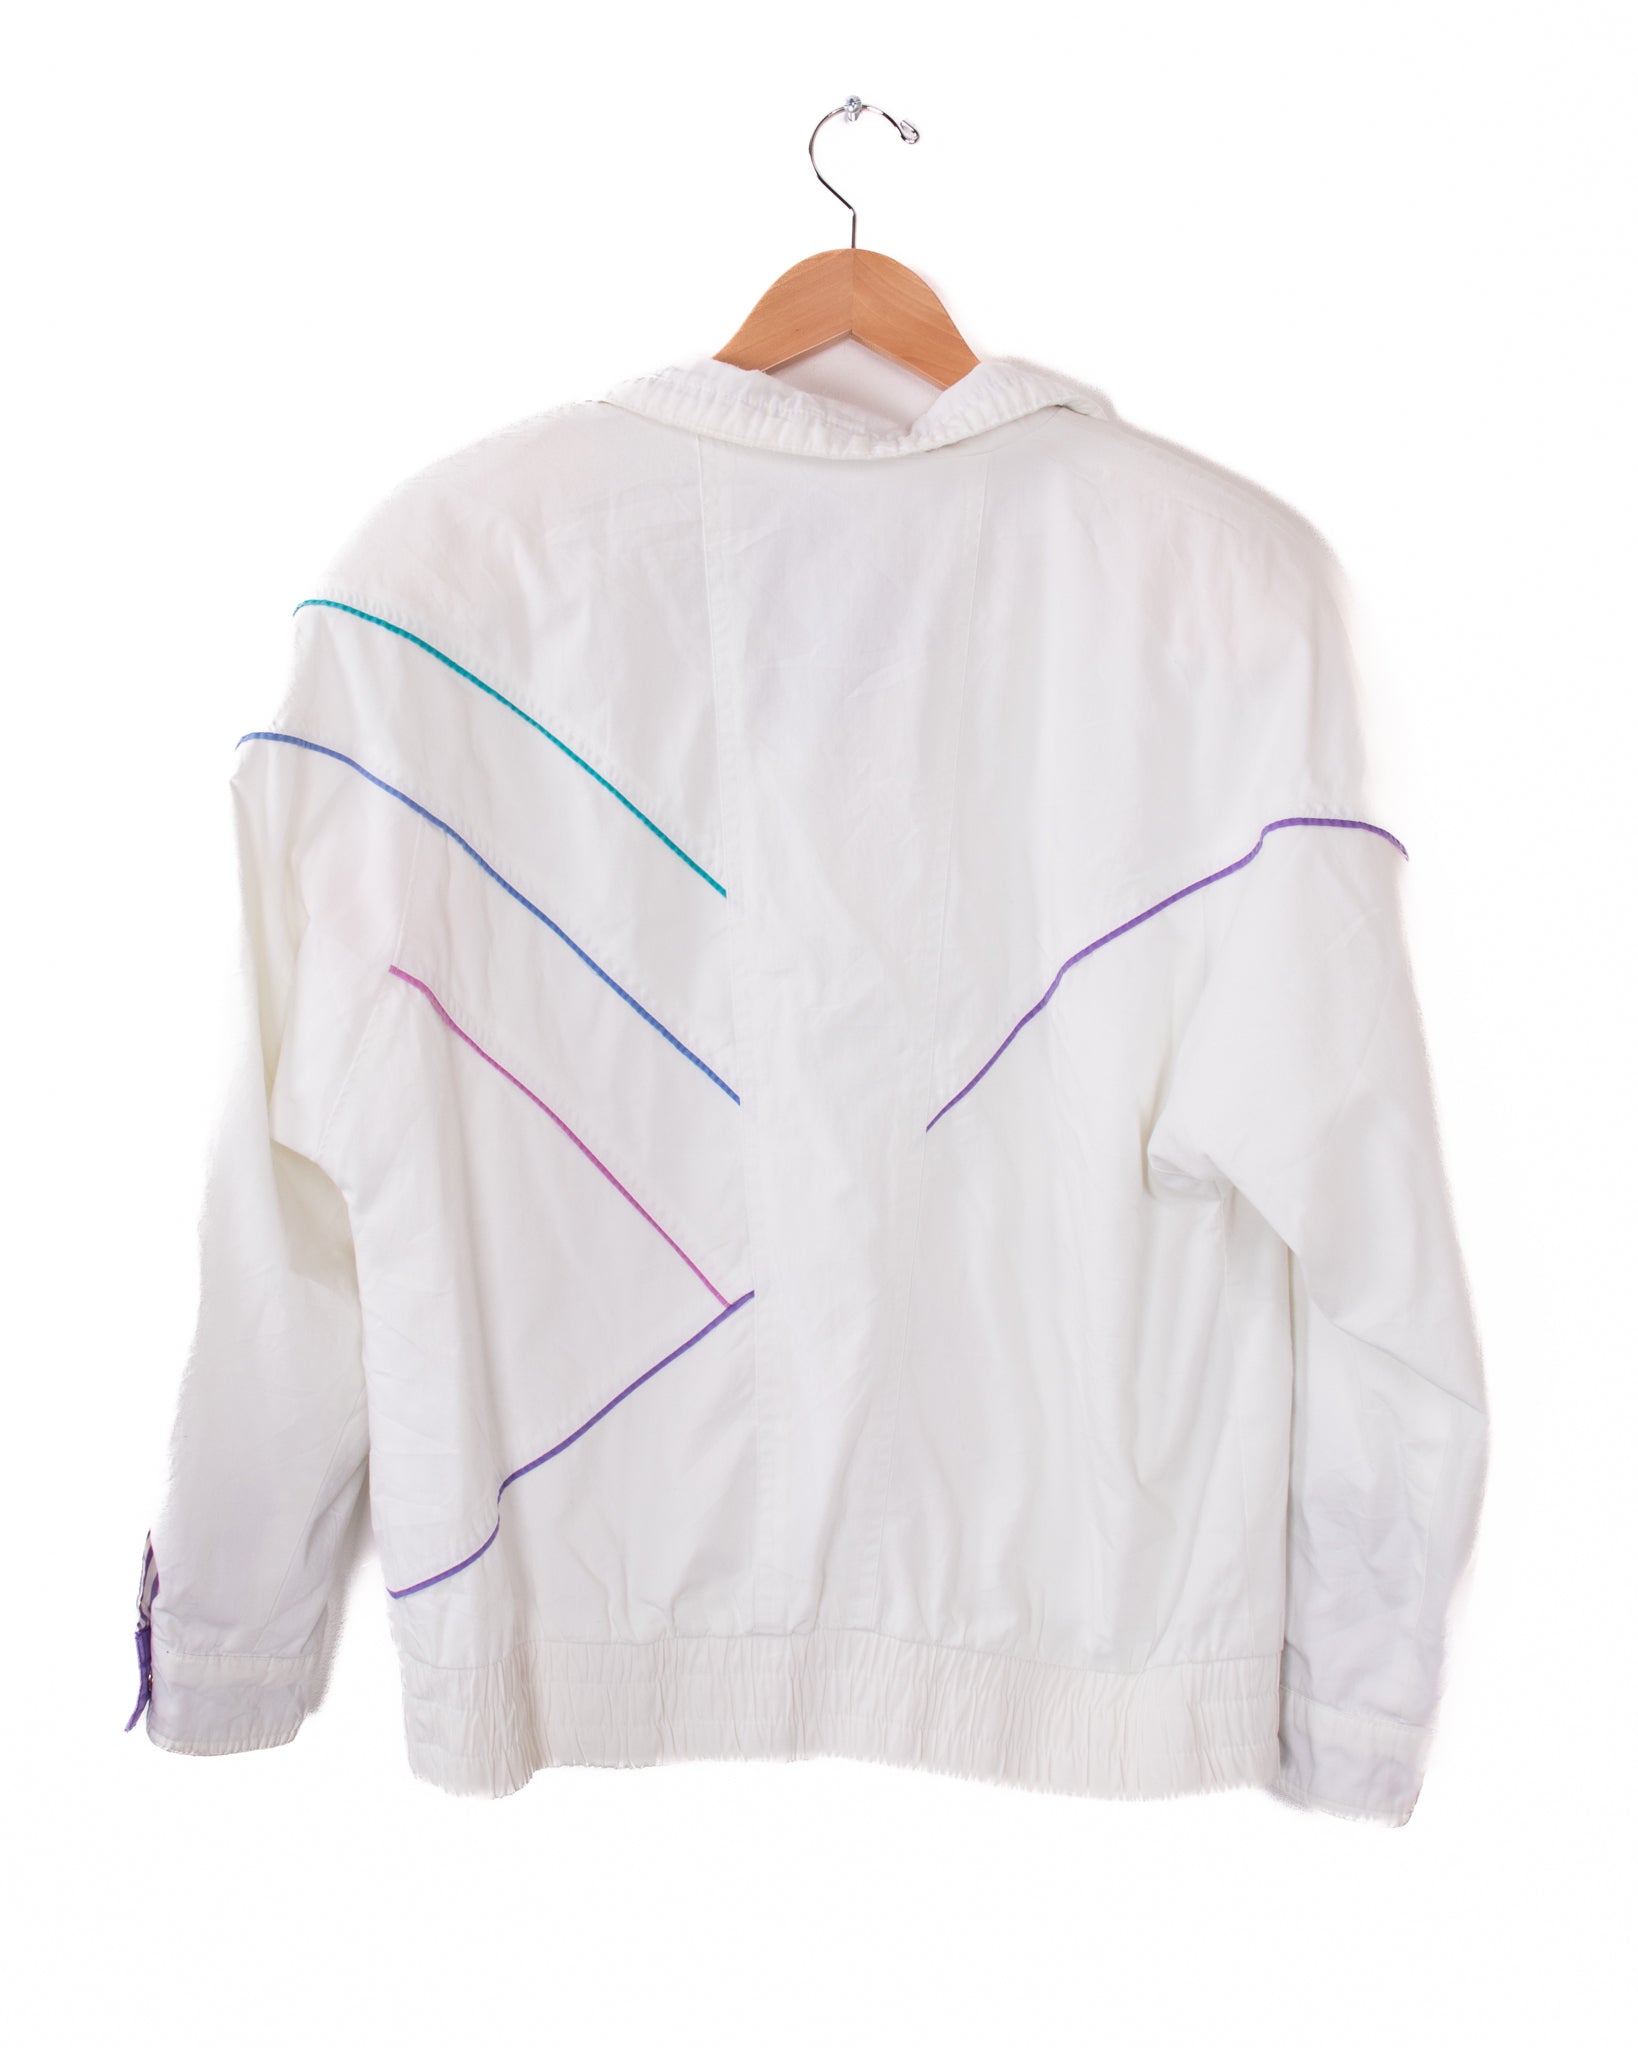 New York Girl White Jagged Lines Jacket